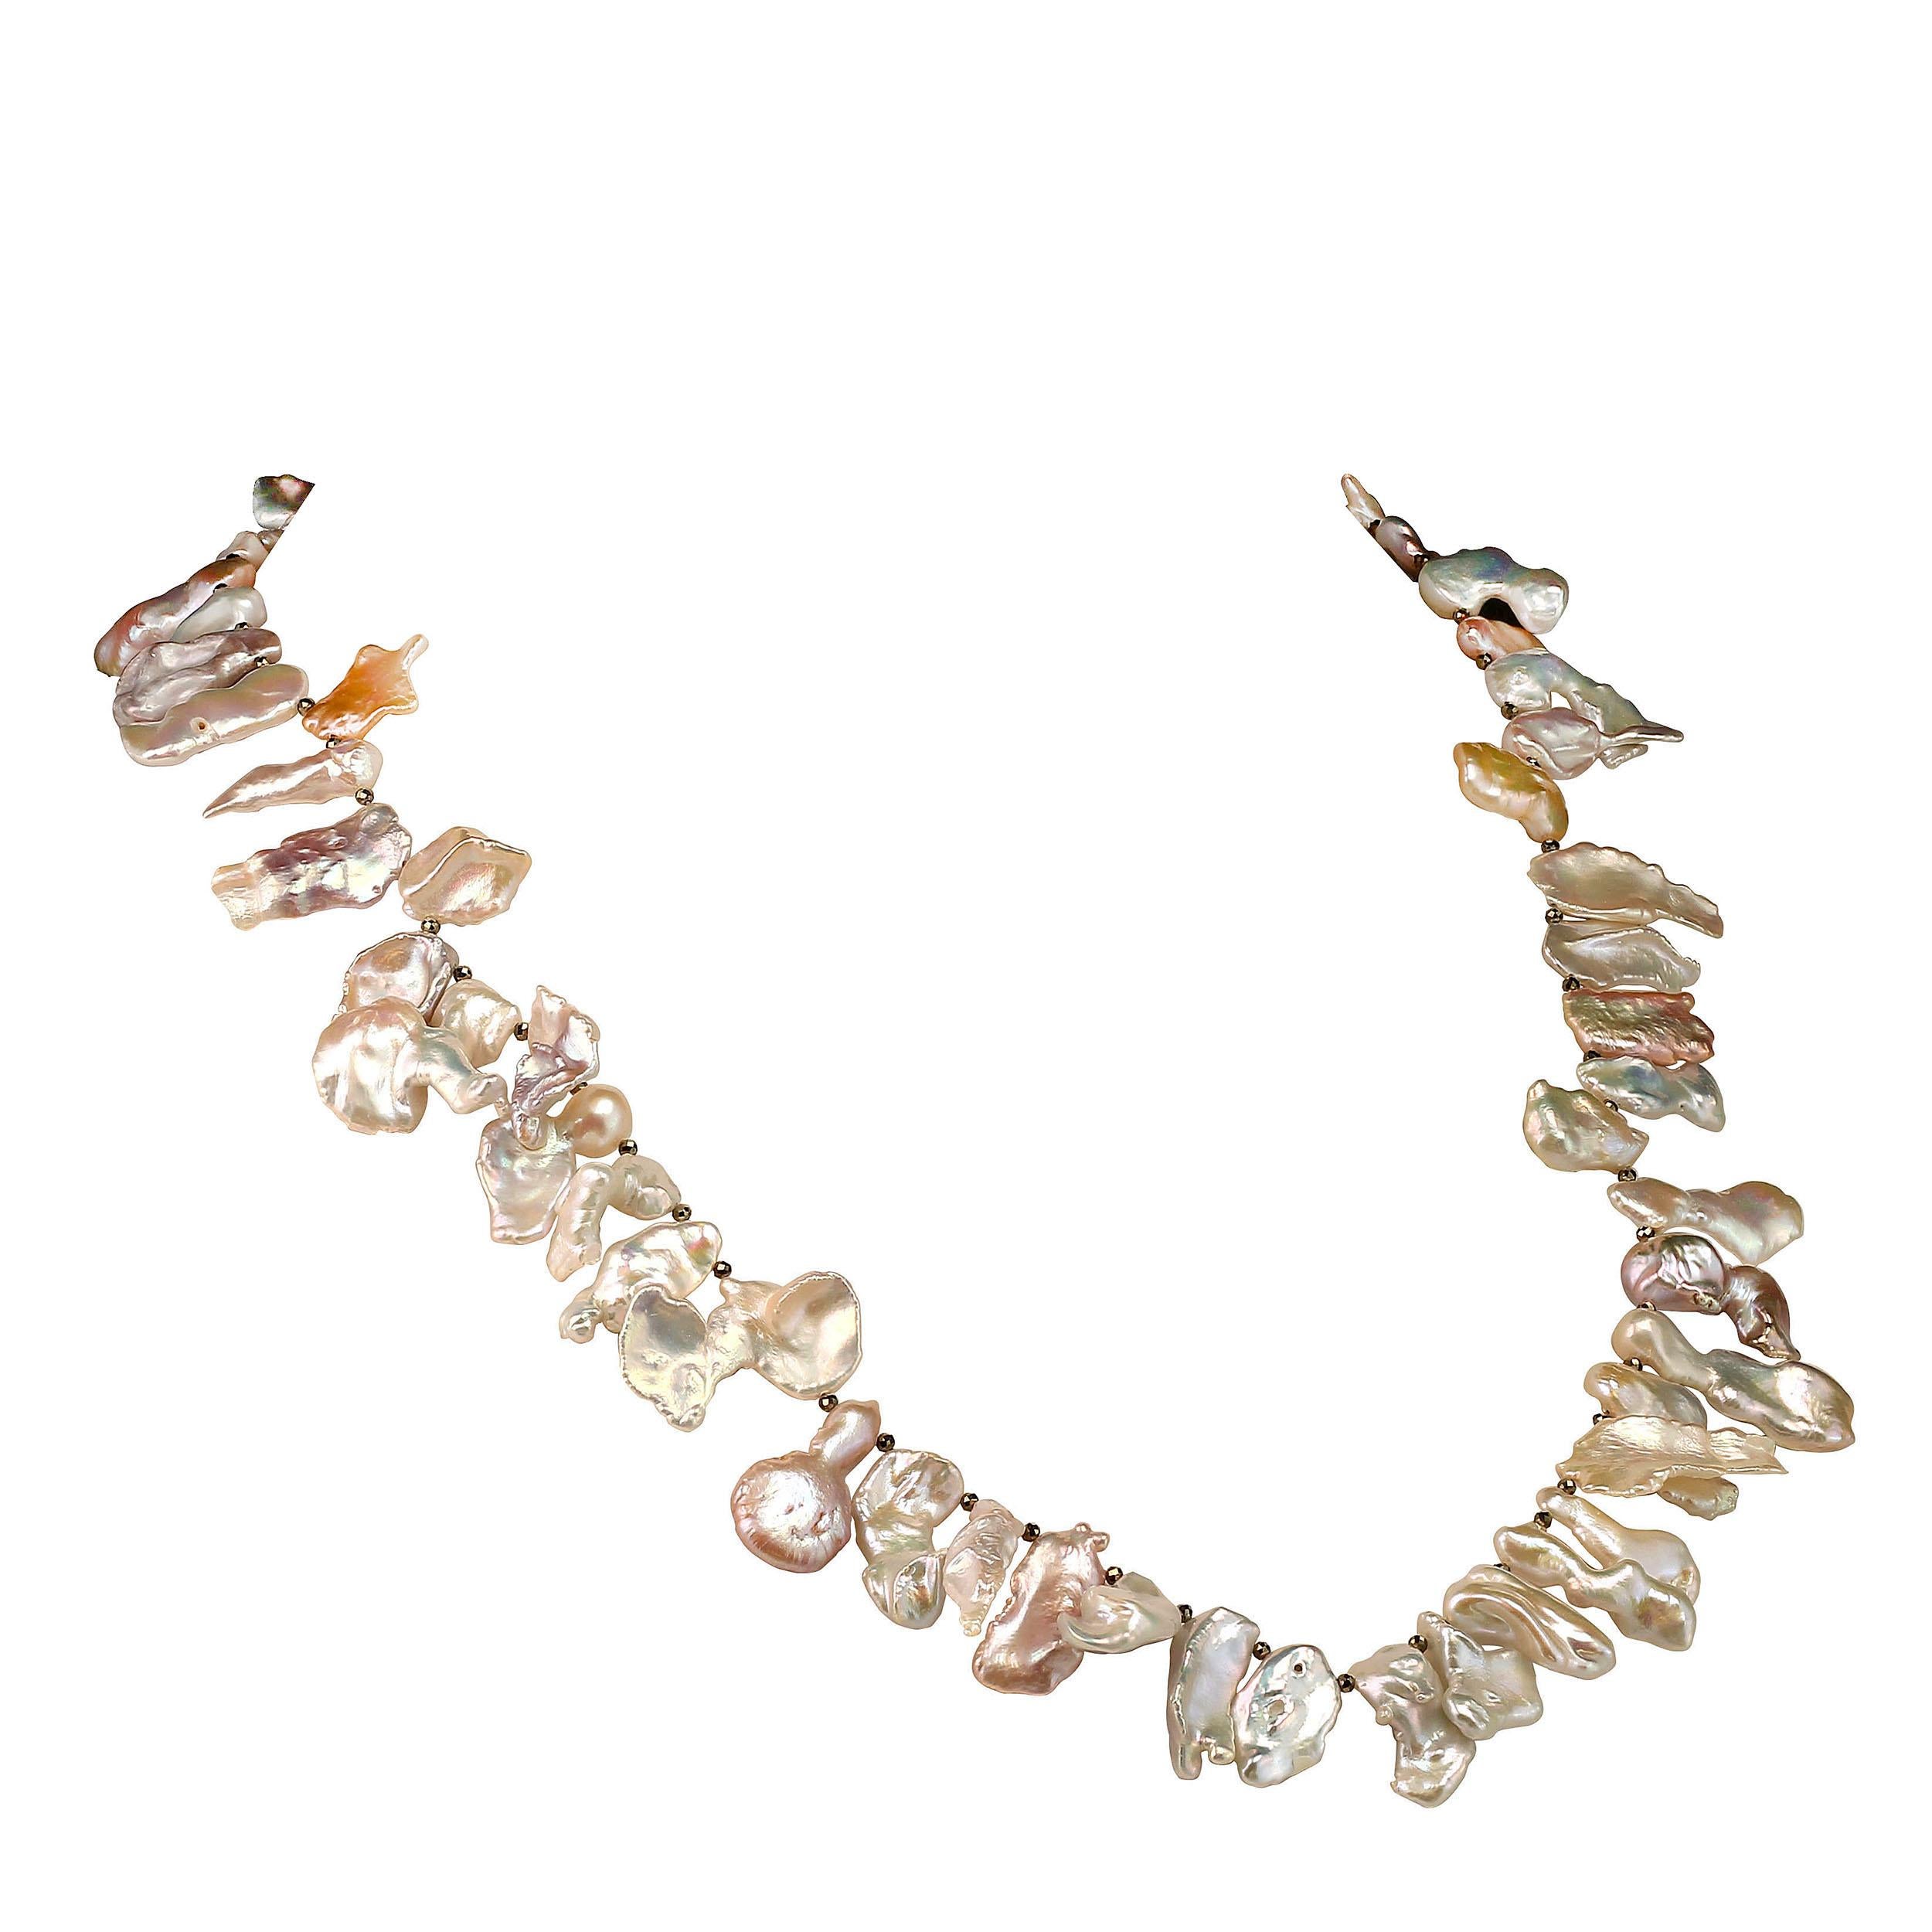 Artisan AJD Freeform, Iridescent Pearls Necklace Pyrite accents   Fabulous Gift!!!